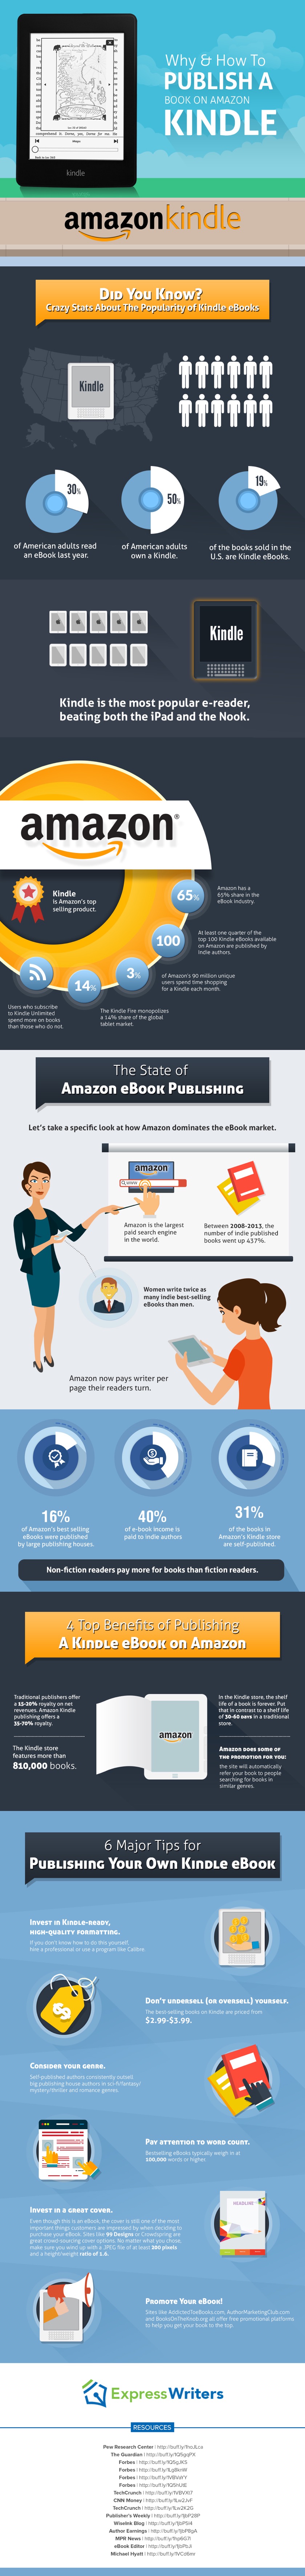 How-to-publish-a-book-on-Amazon-Kindle-infographic